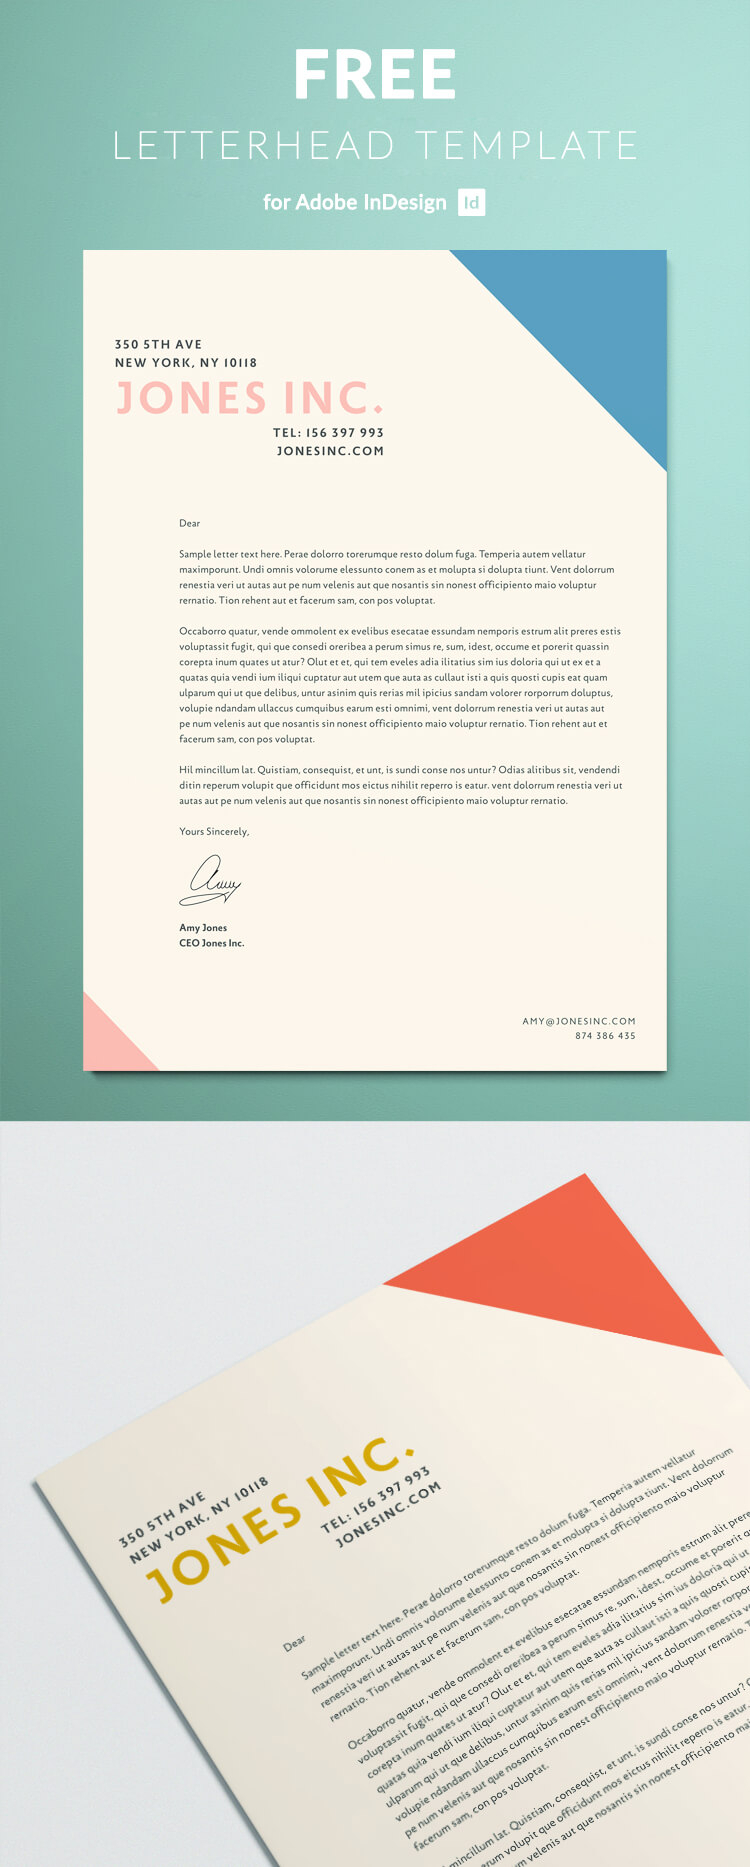 Letterhead Template For Indesign | Free Download Inside Letterhead Templates Indesign